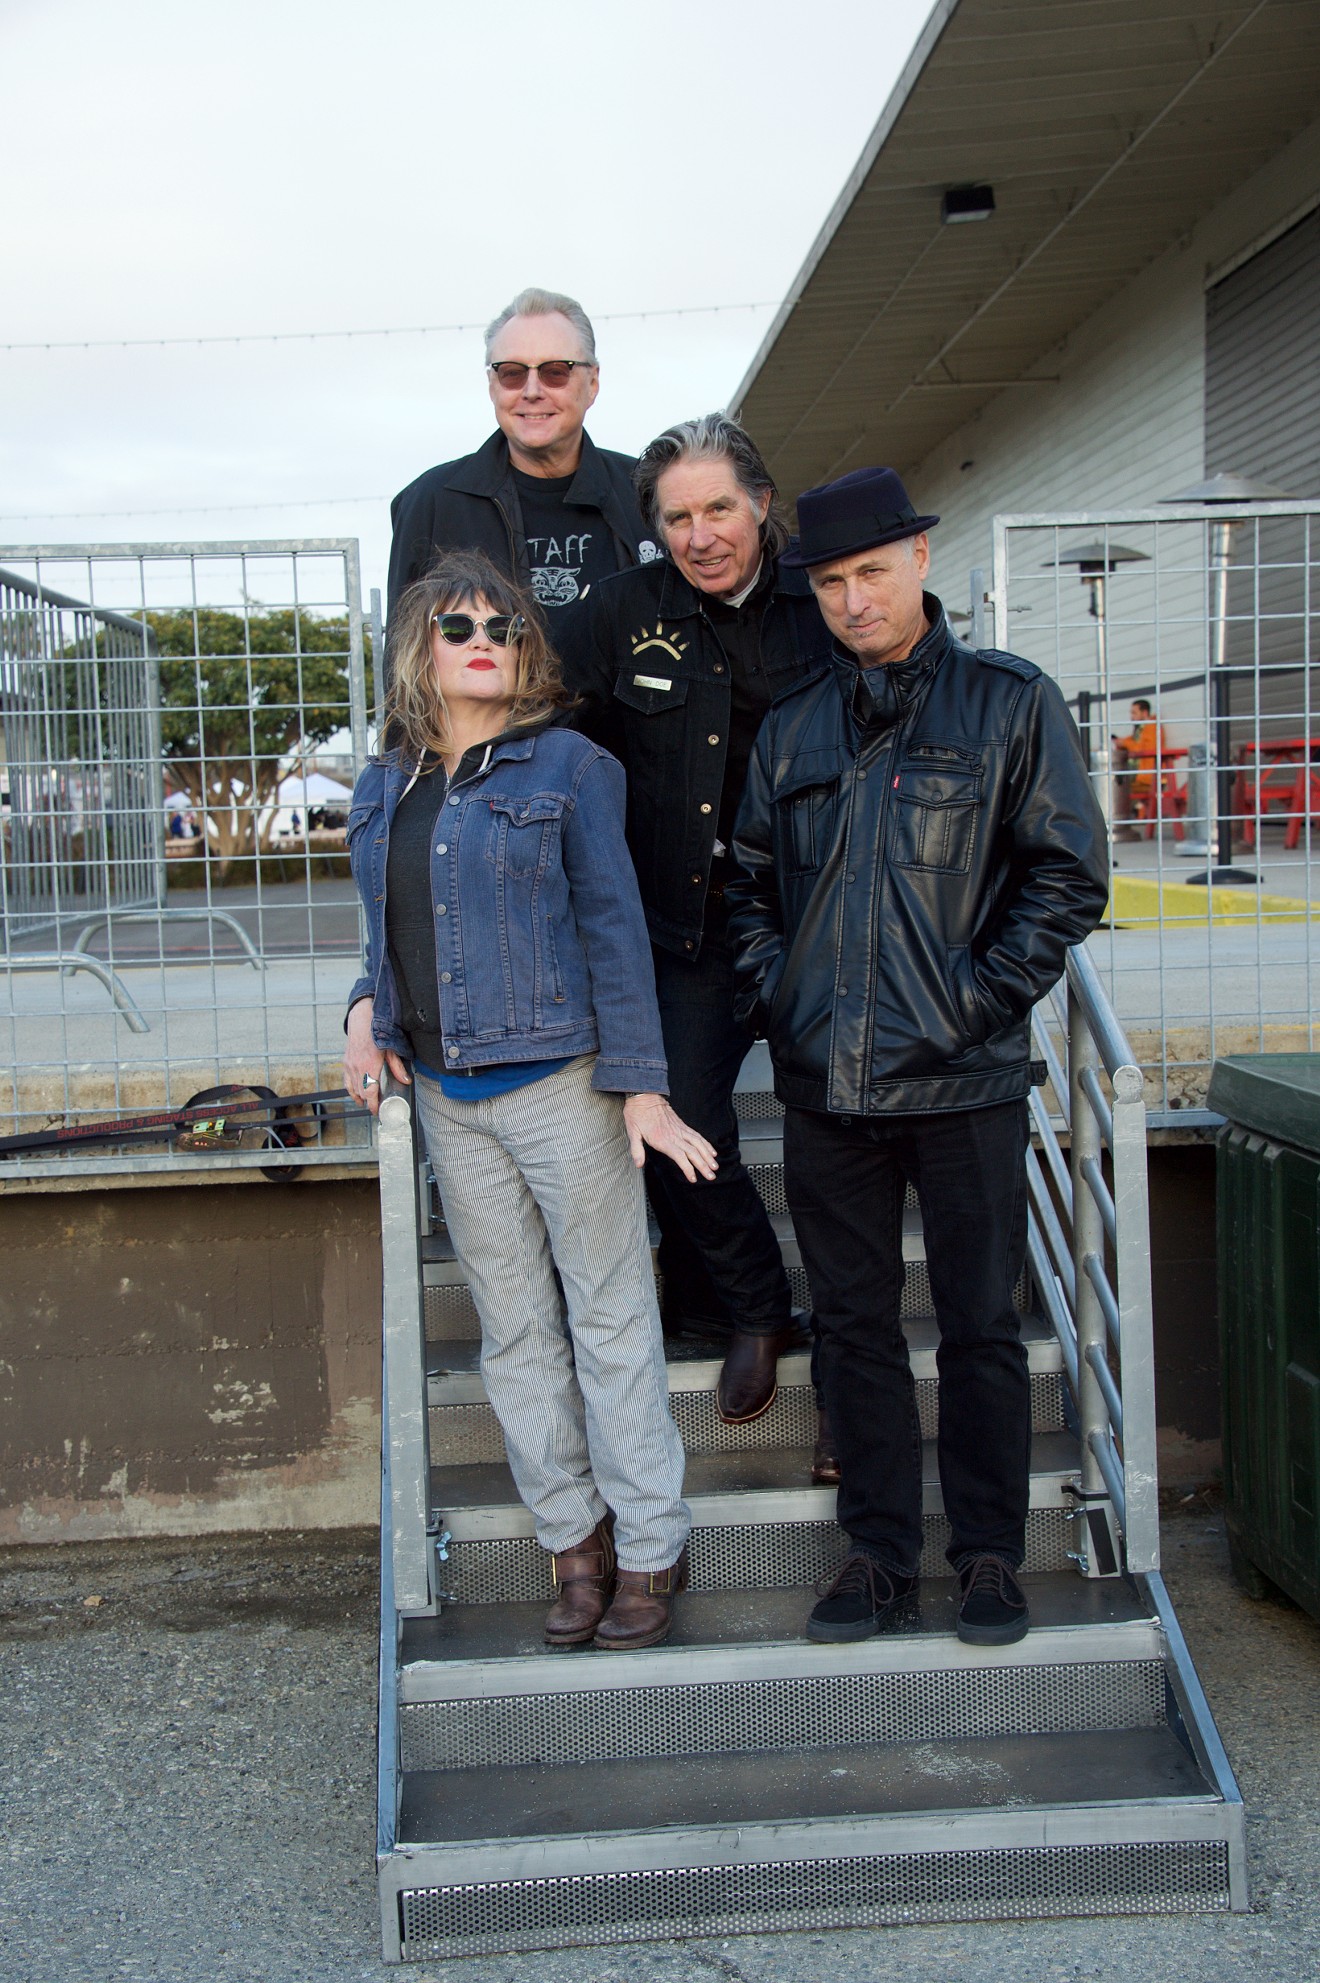 X return to Phoenix with Violent Femmes in tow.